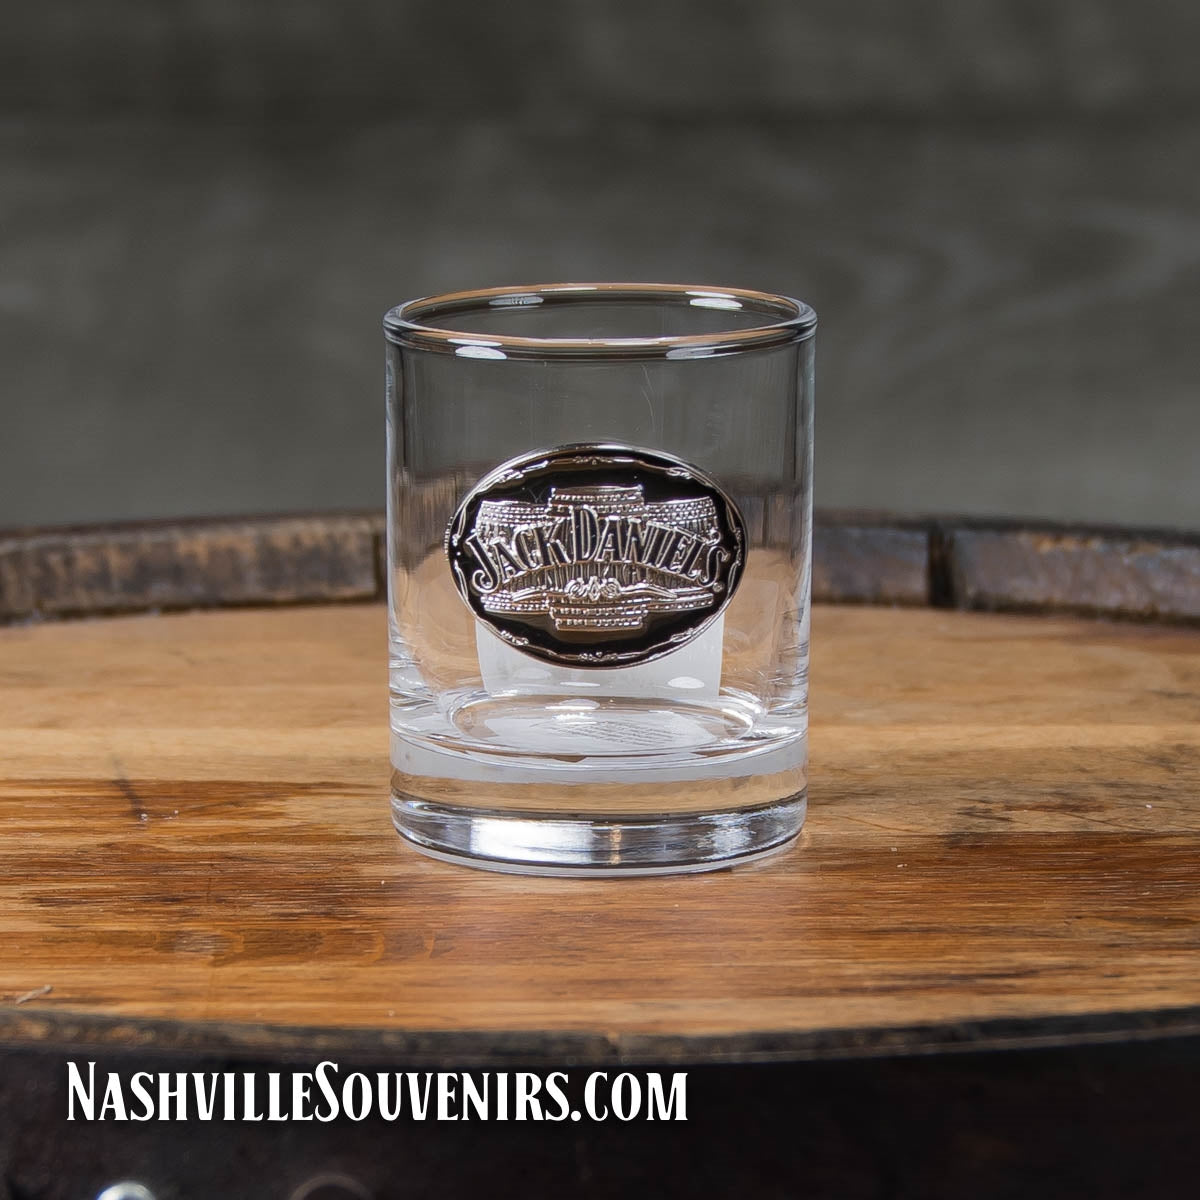 Officially licensed Jack Daniel's Medallion Shot Glass. This is a bottom weighted shot glass featuring the famous three barrel medallion. The medallion also has a black resin background that provides a lot of contrast making the Jack Daniel's logo really stand out.